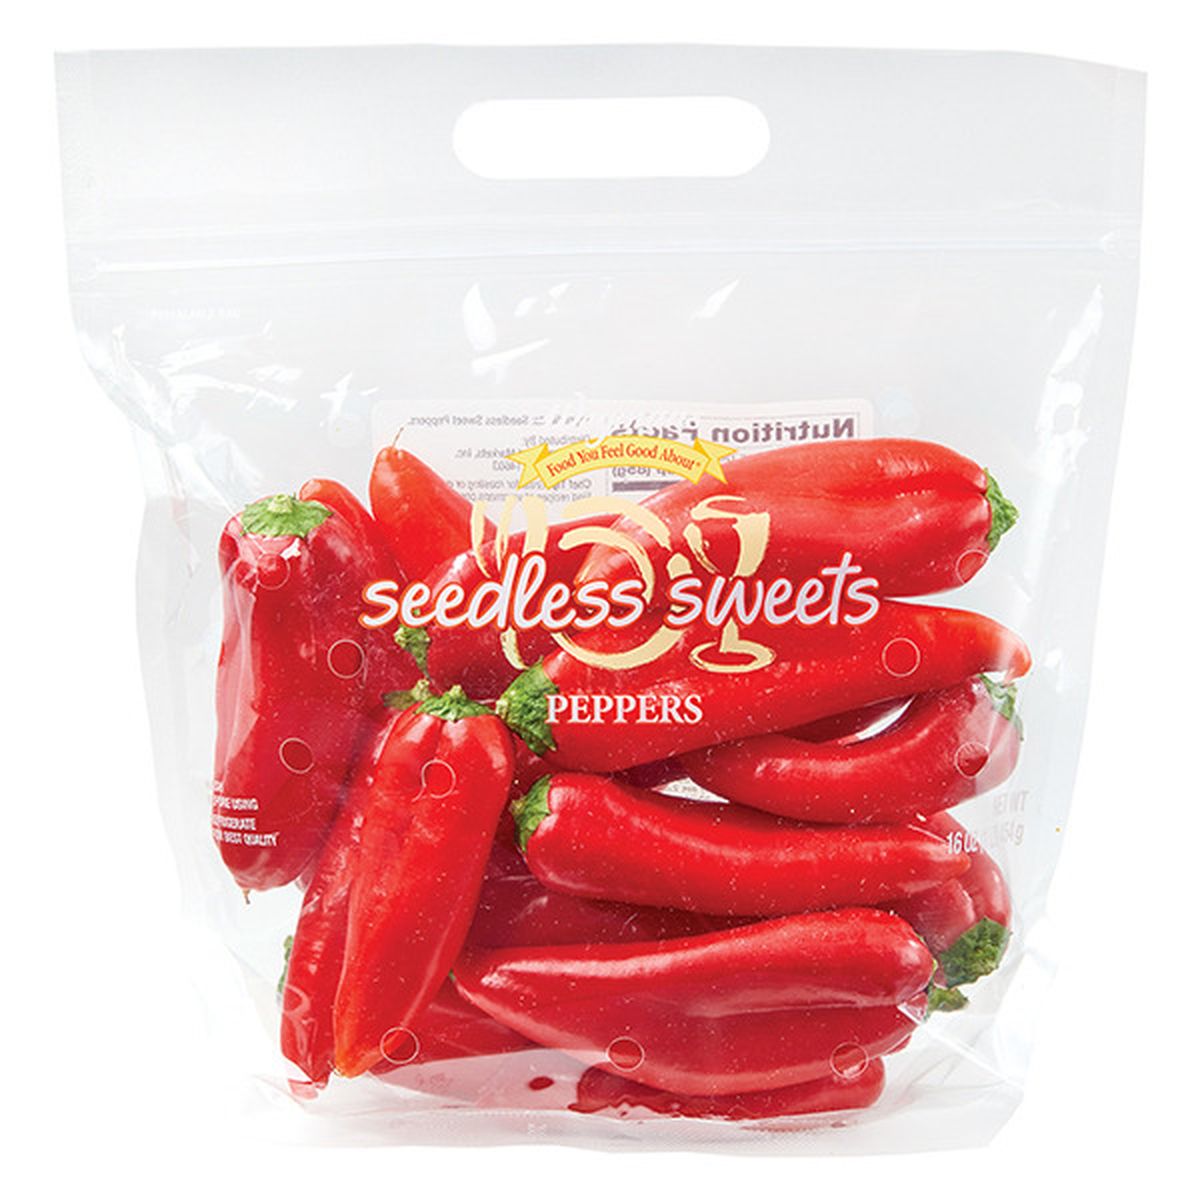 Calories in Seedless Sweet Peppers